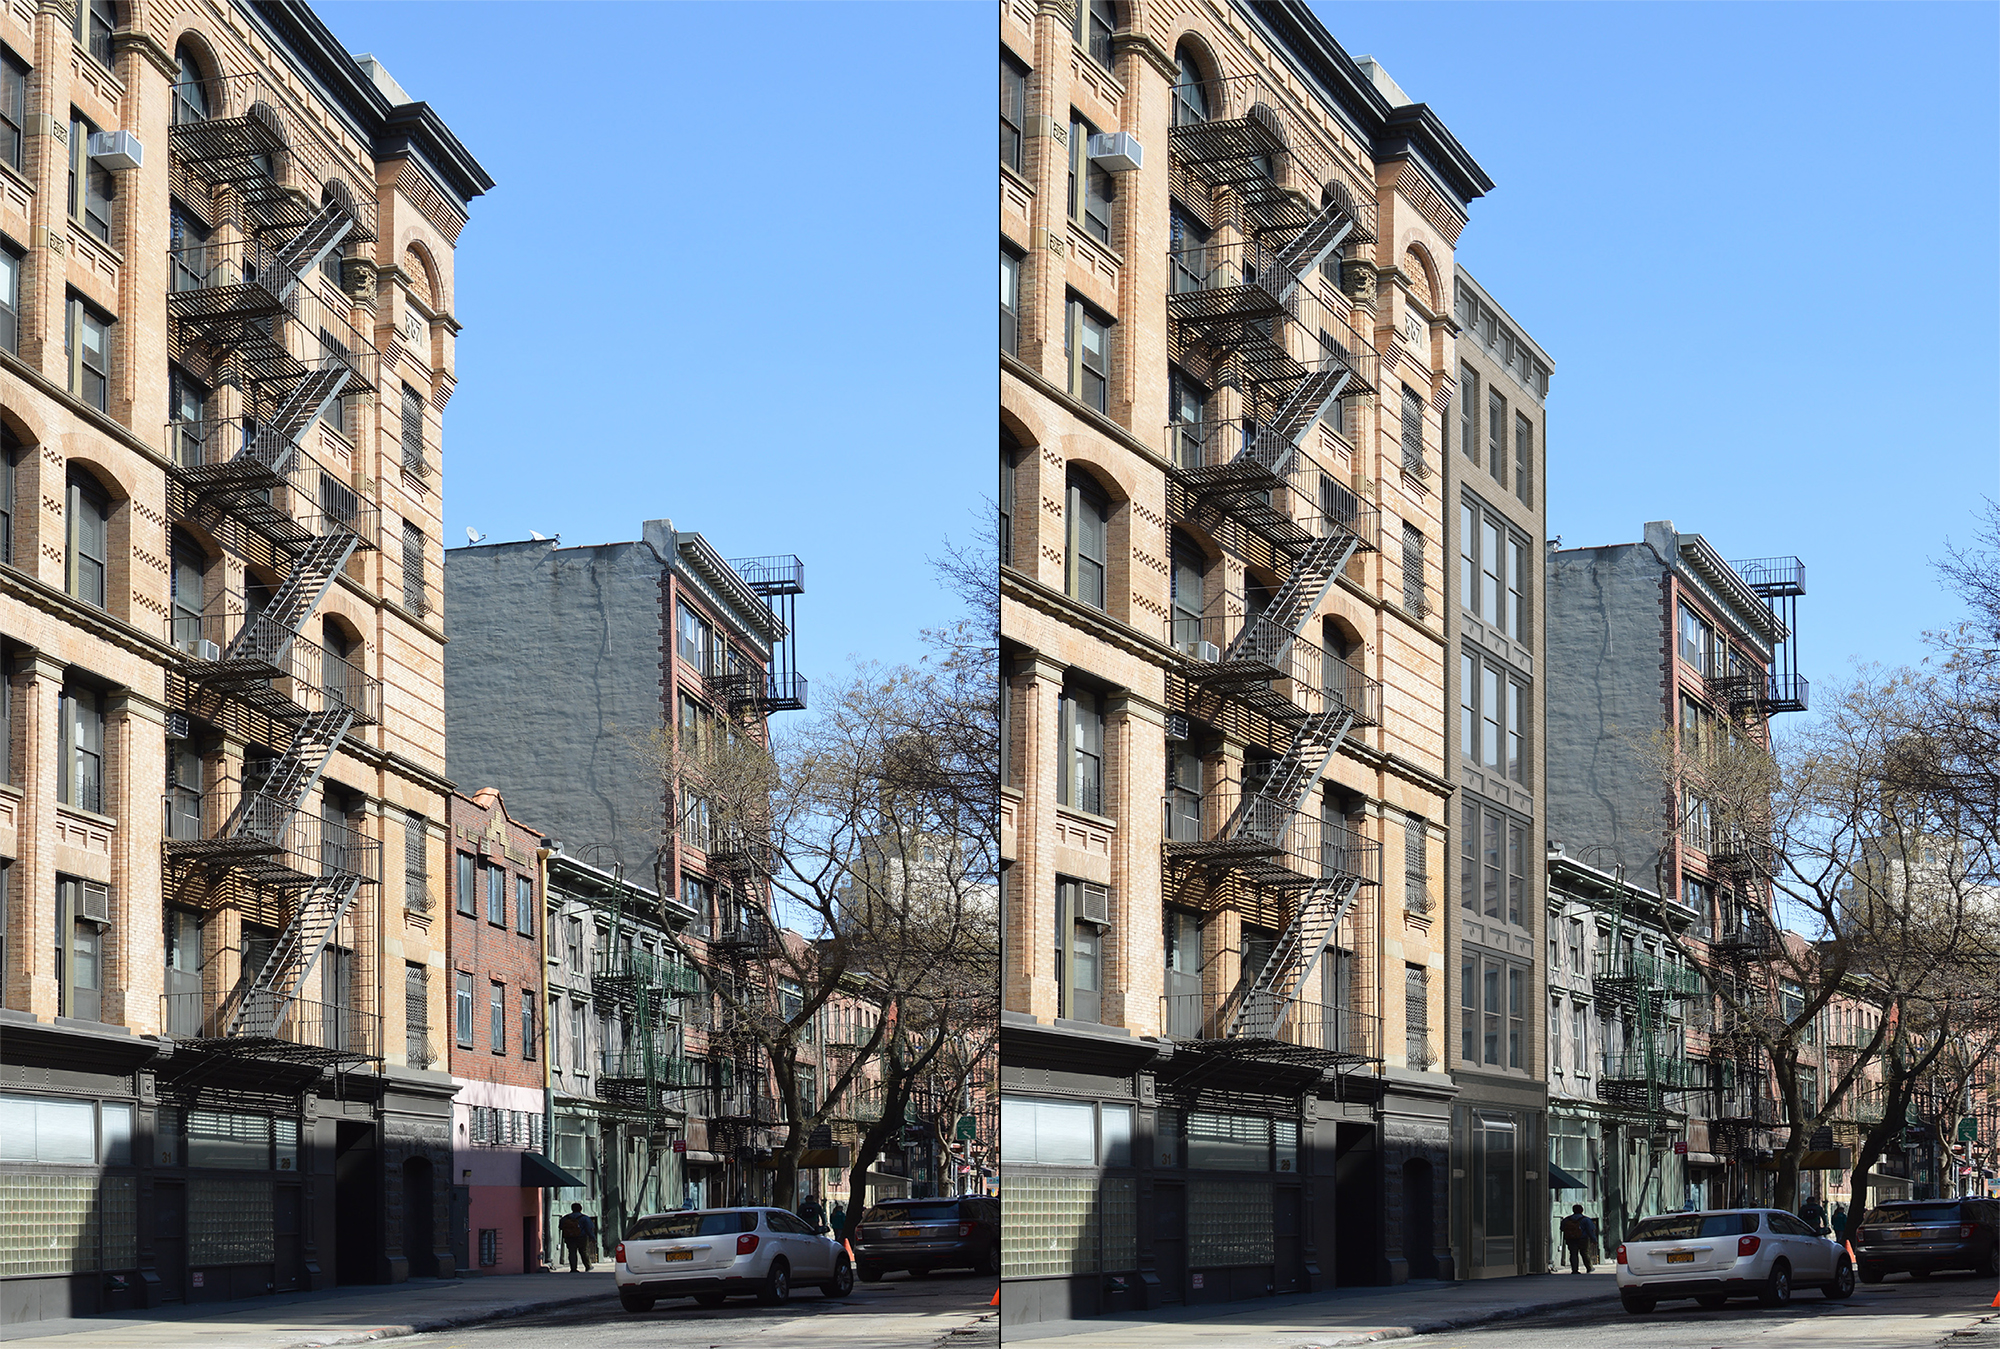 25 Bleecker Street, existing and proposed conditions.